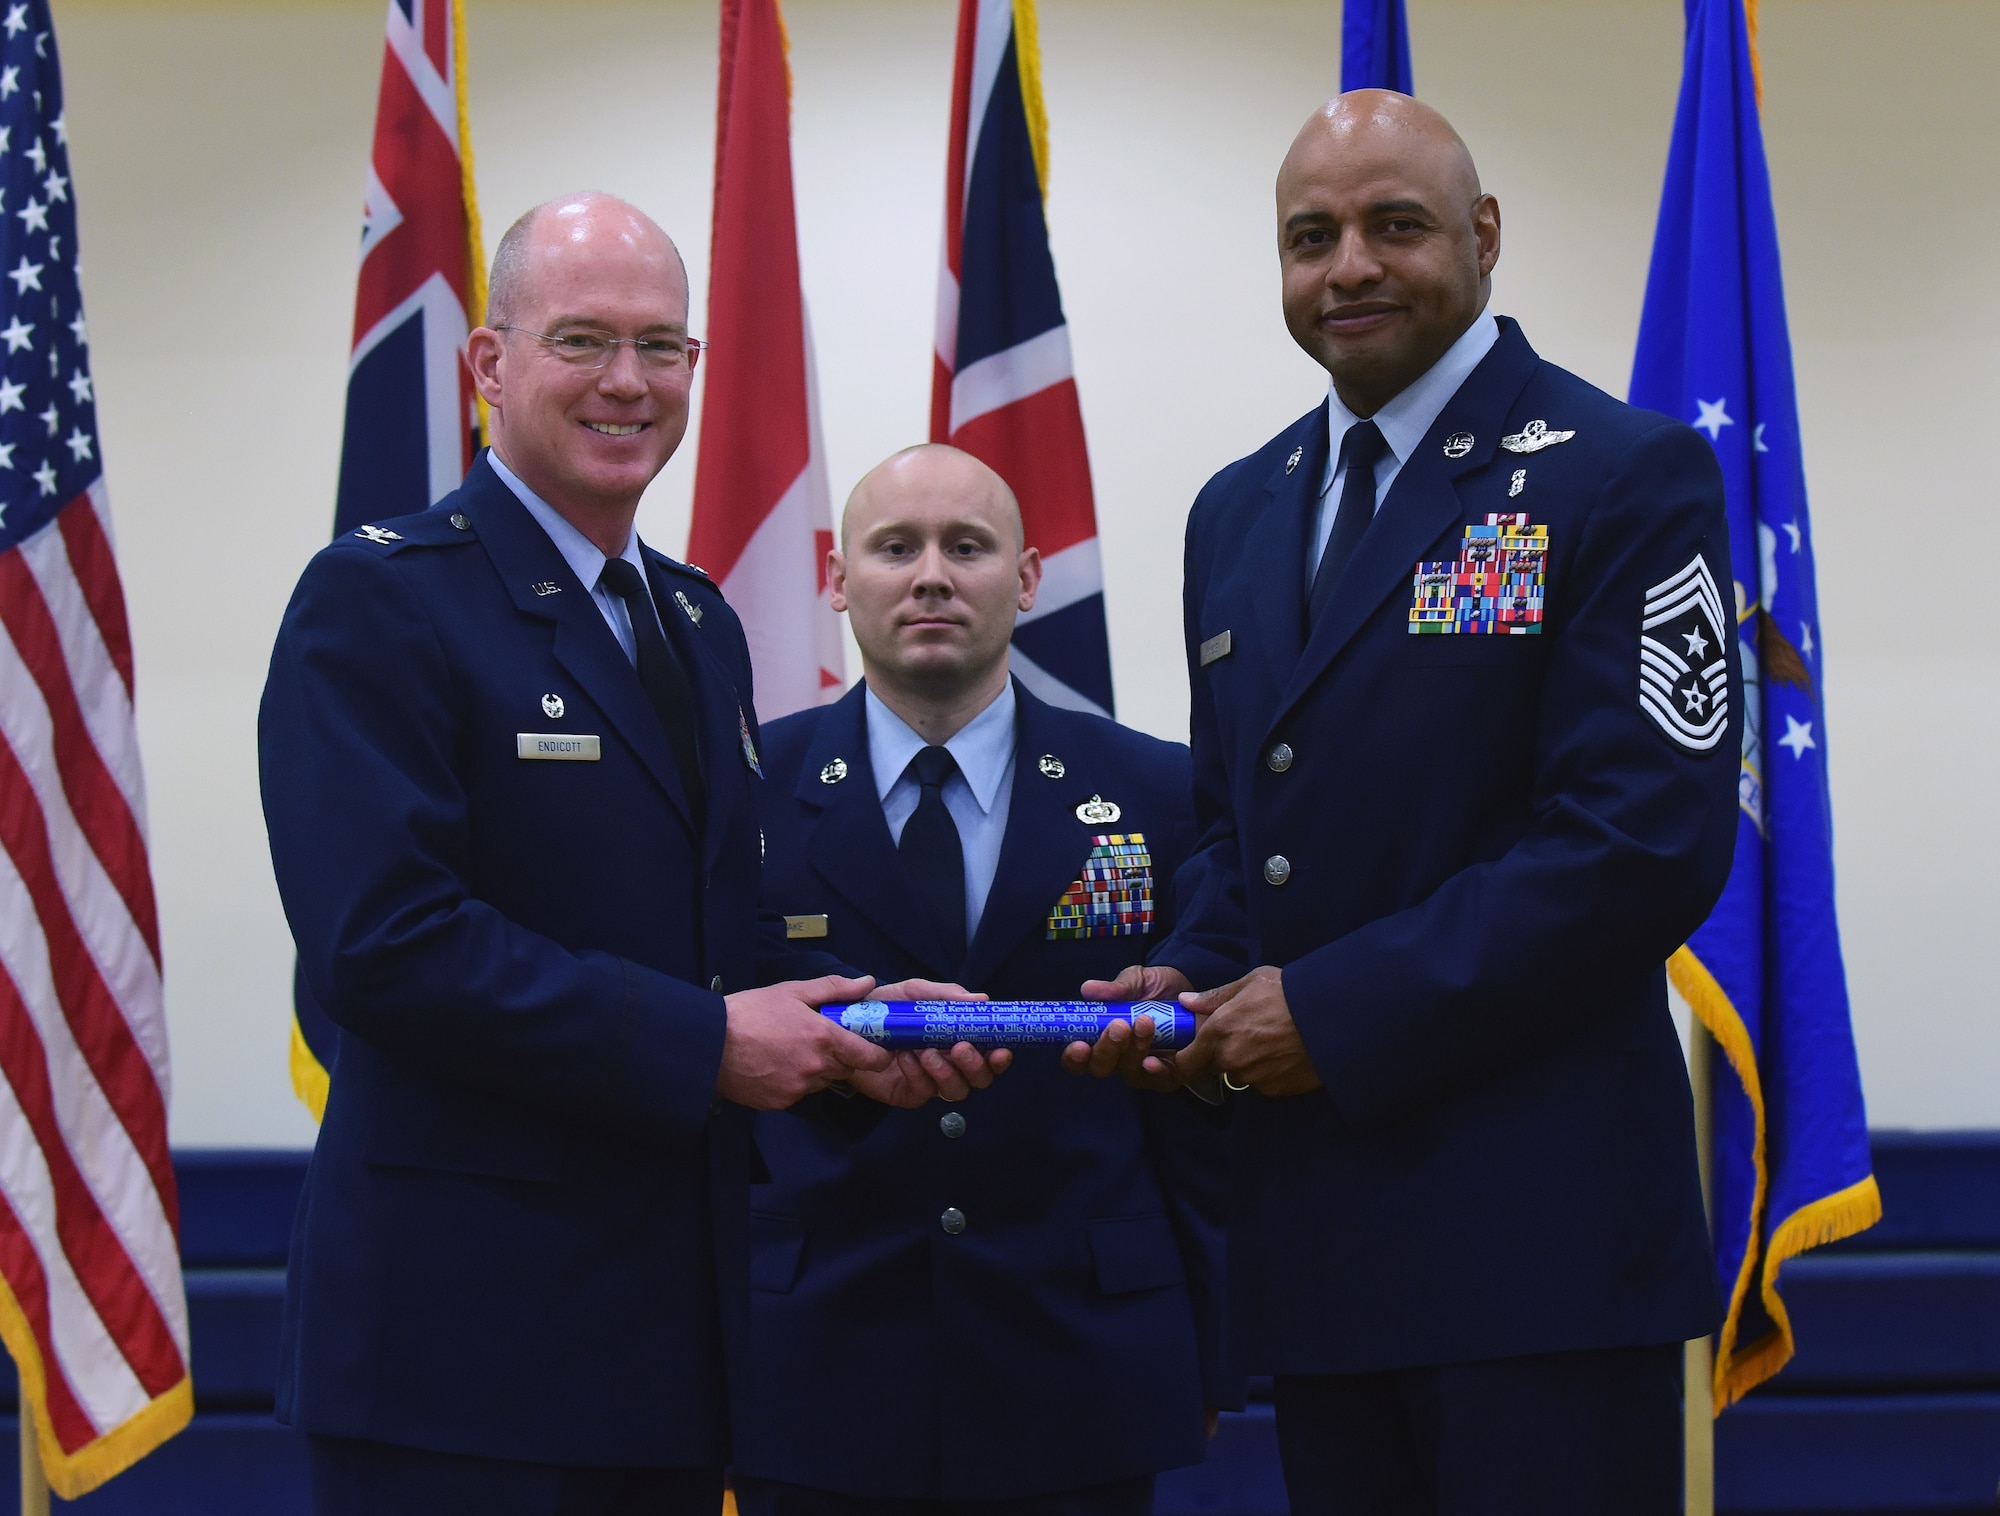 Chief Master Sgt. Rod Lindsey, right, 460th Space Wing outgoing command chief, relinquishes the baton symbolizing the change of leadership to Col. Troy L. Endicott, 460th SW commander, on Buckley Air Force Base, Colorado, July 20, 2018.